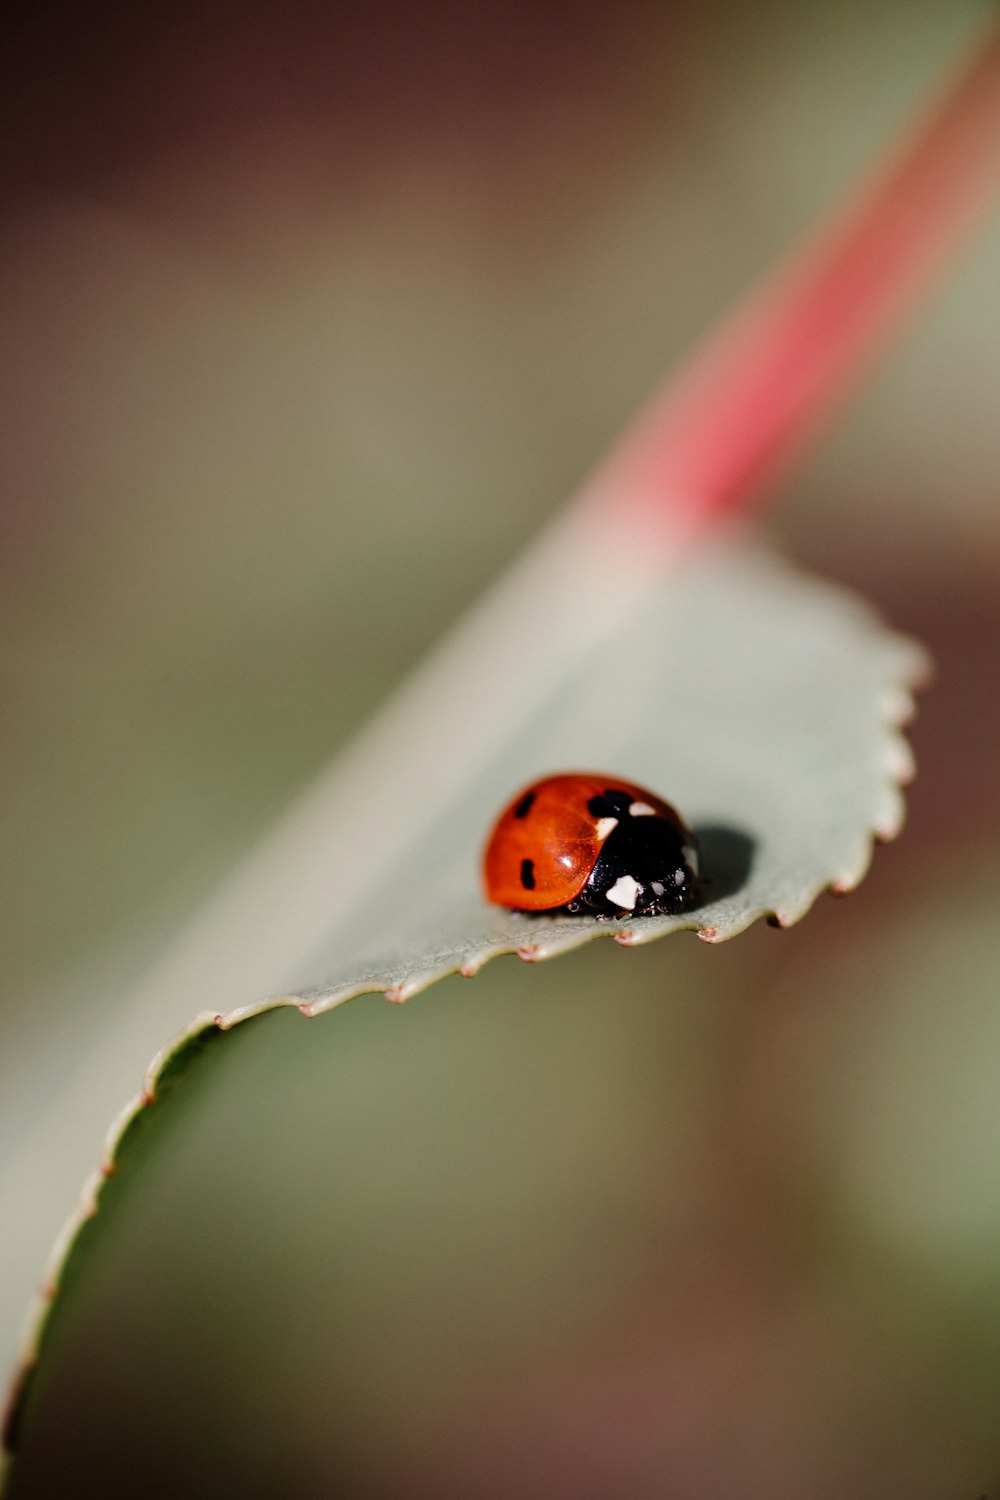 red ladybug on white leaf in close up photography during daytime